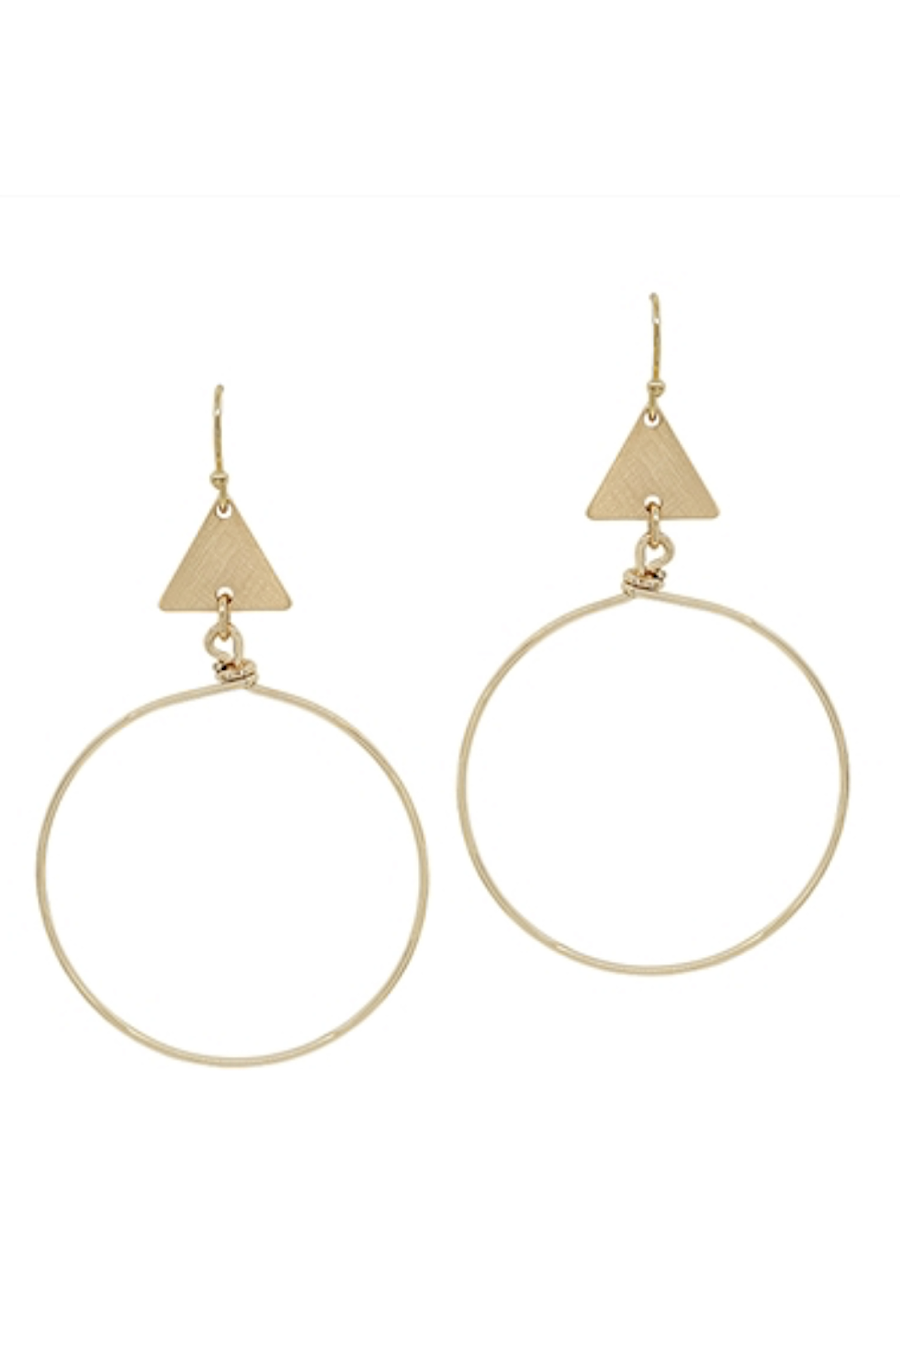 Triangle & Circle Earrings in Silver or Gold